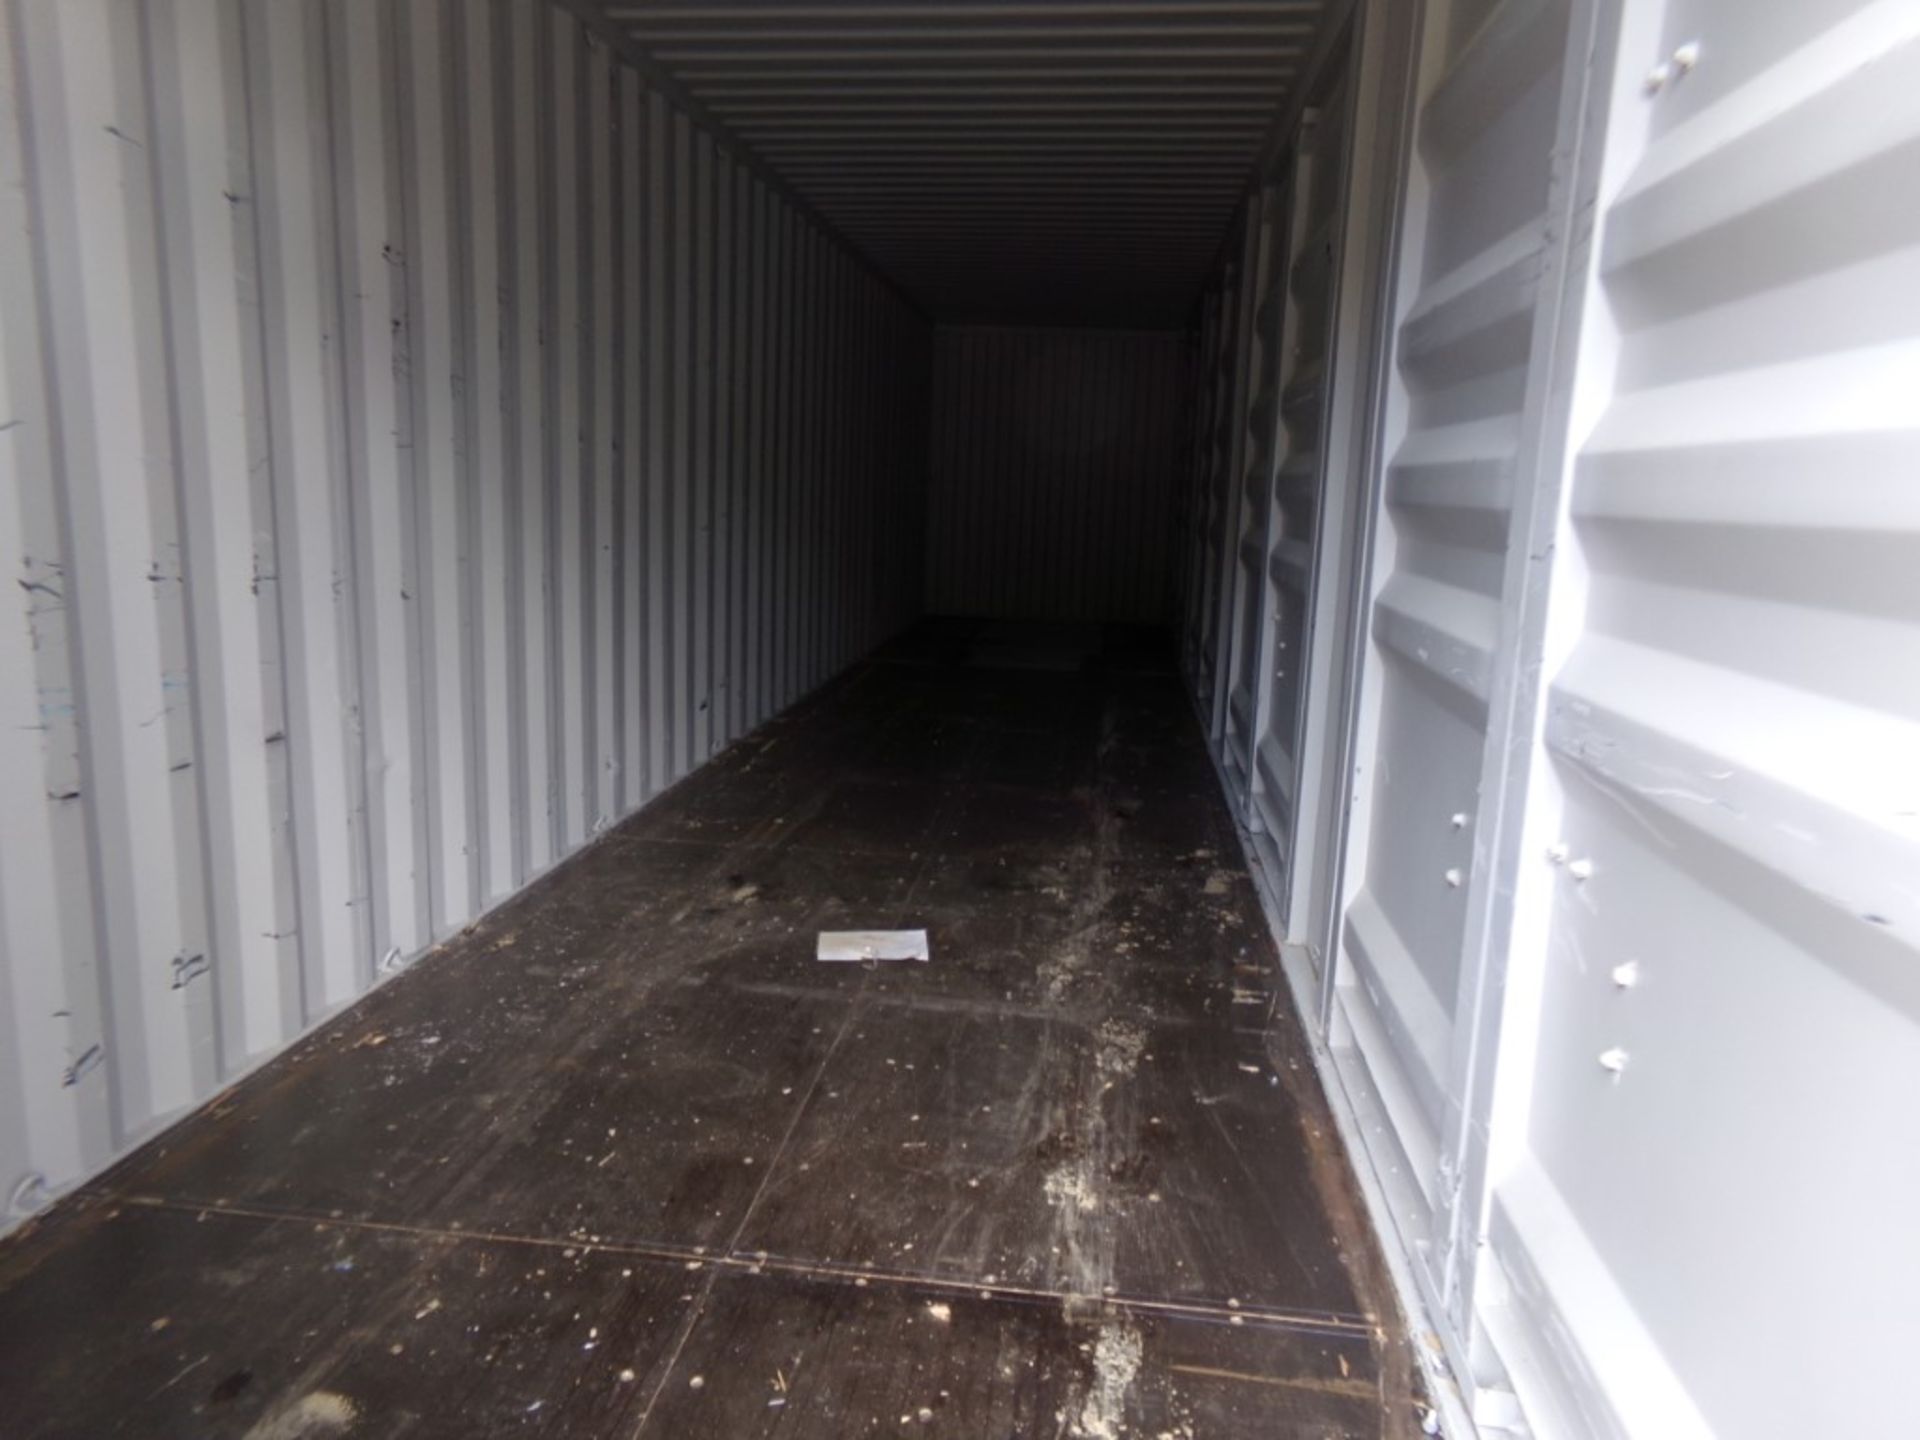 New 40' Container wirh (4) Side Access Doors and Barn Doors on 1 End, Cont. # CFGU4001973 - Image 4 of 5